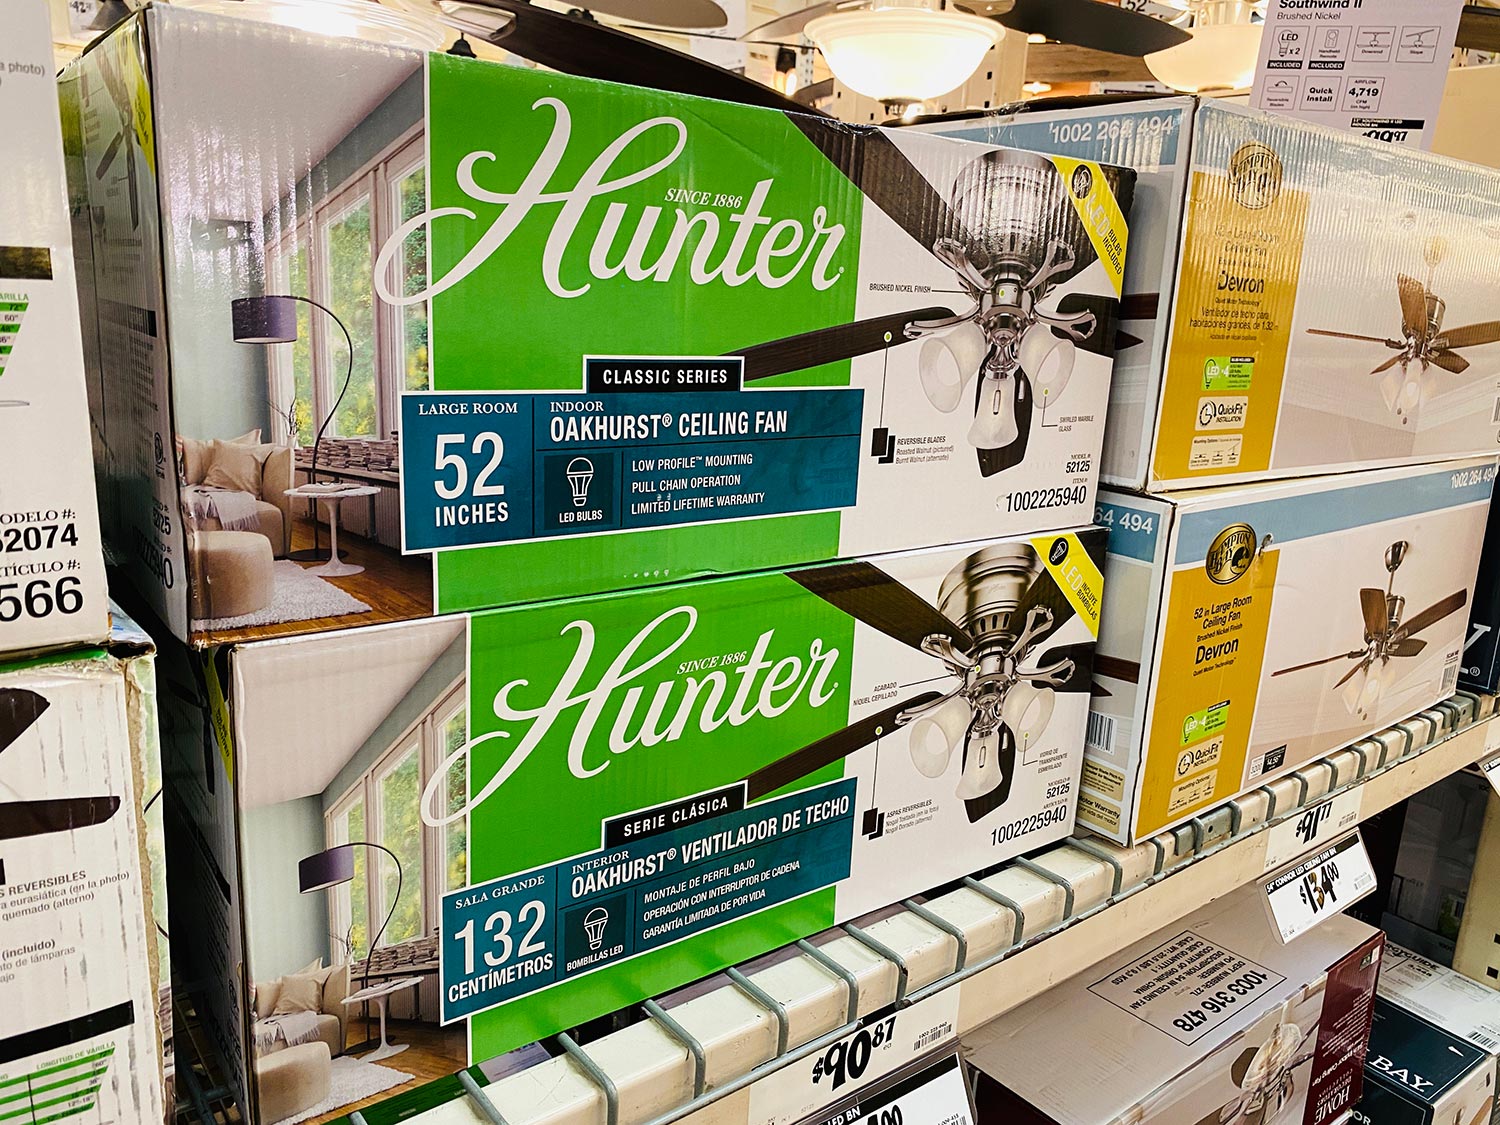 Hunter brand of ceiling fans in boxes on shelf